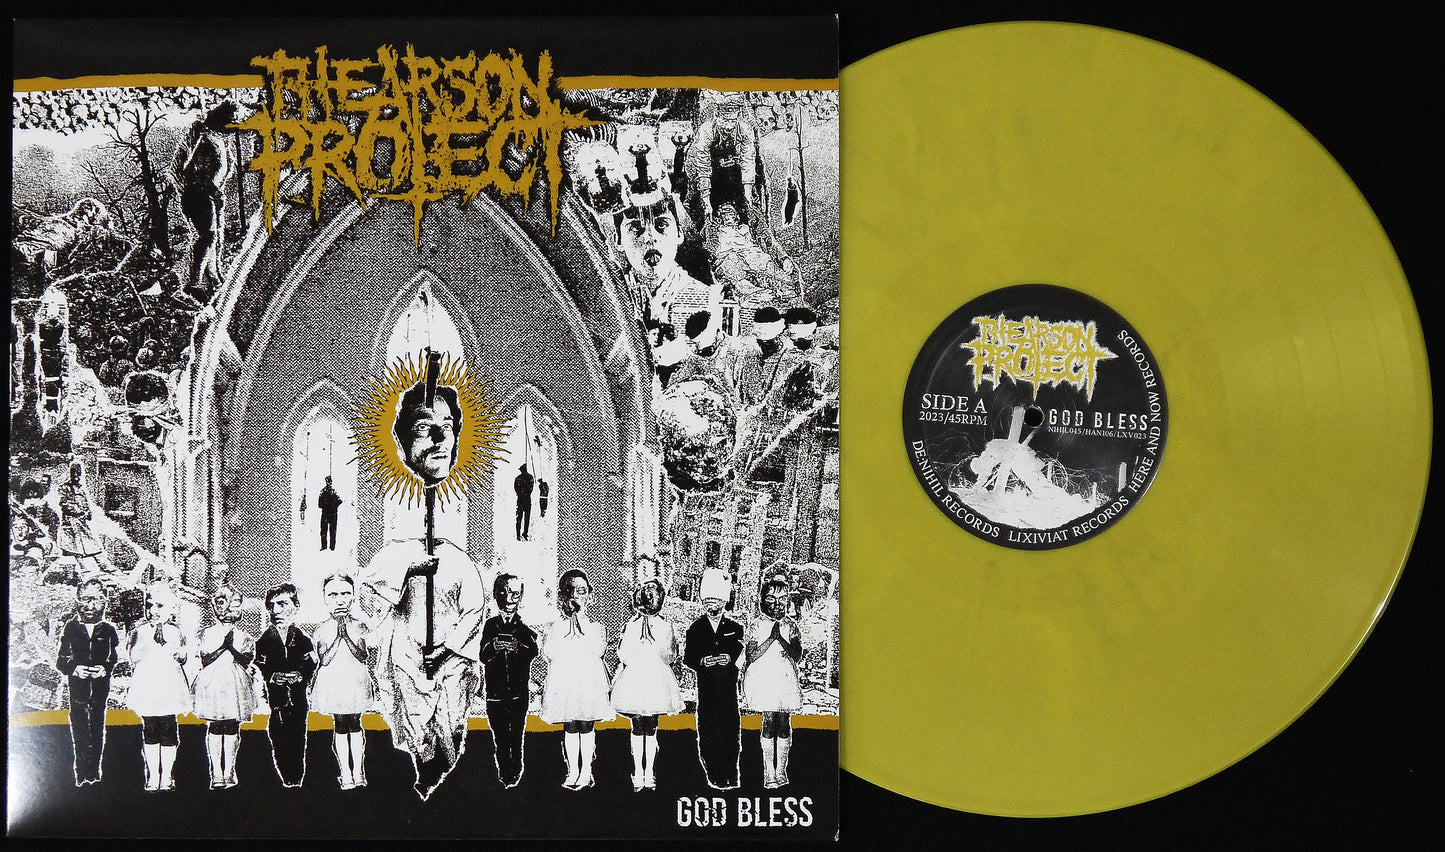 THE ARSON PROJECT - God Bless 12"